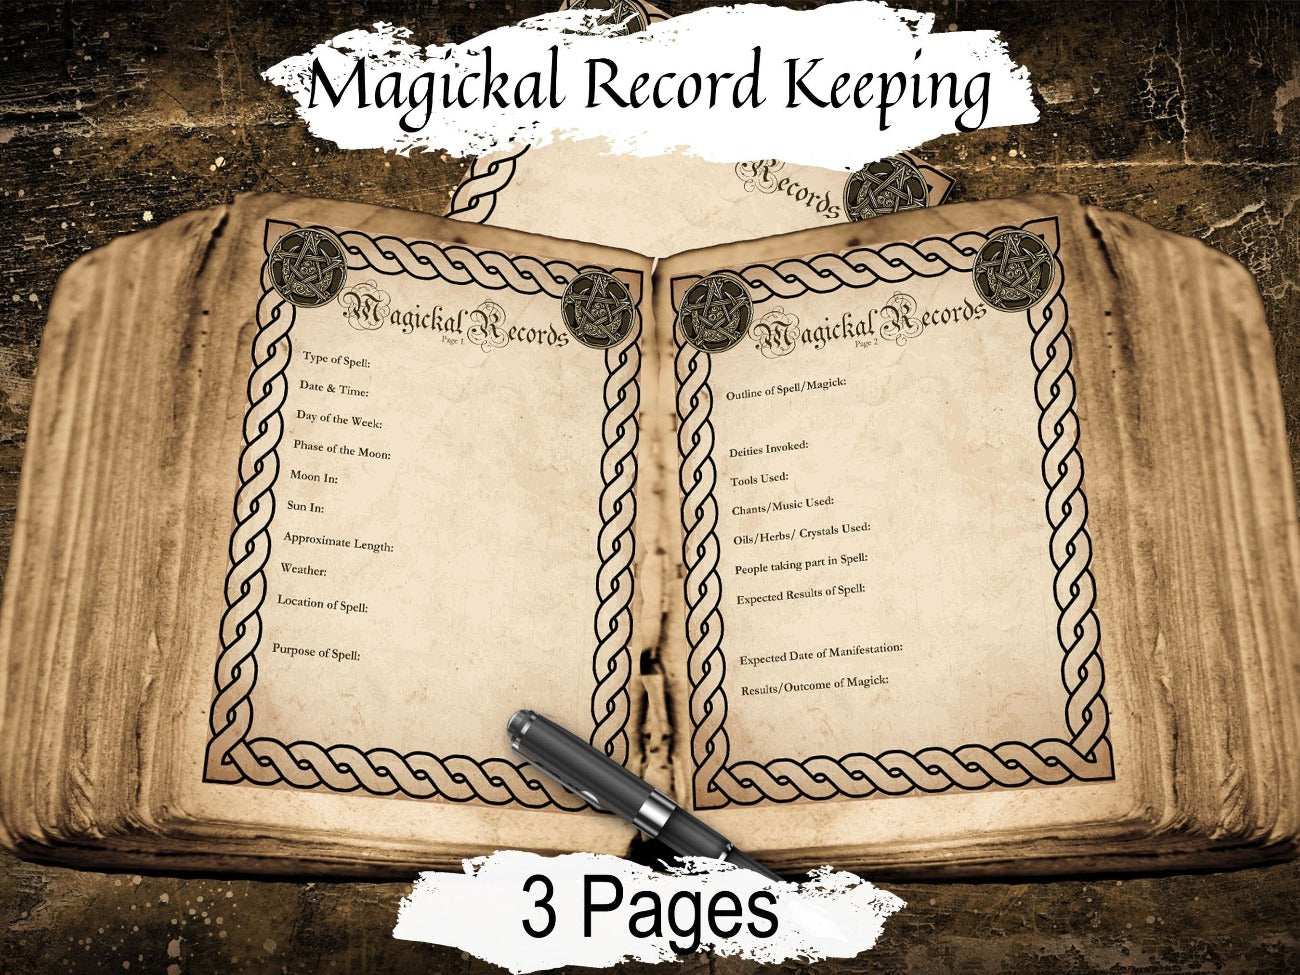 MAGICKAL RECORDS, Spell Journal Page, Keep a Witchcraft Magic Diary, Wicca Ritual Recipe Template Guide for your Book of Shadows, 3 Pages - Morgana Magick Spell